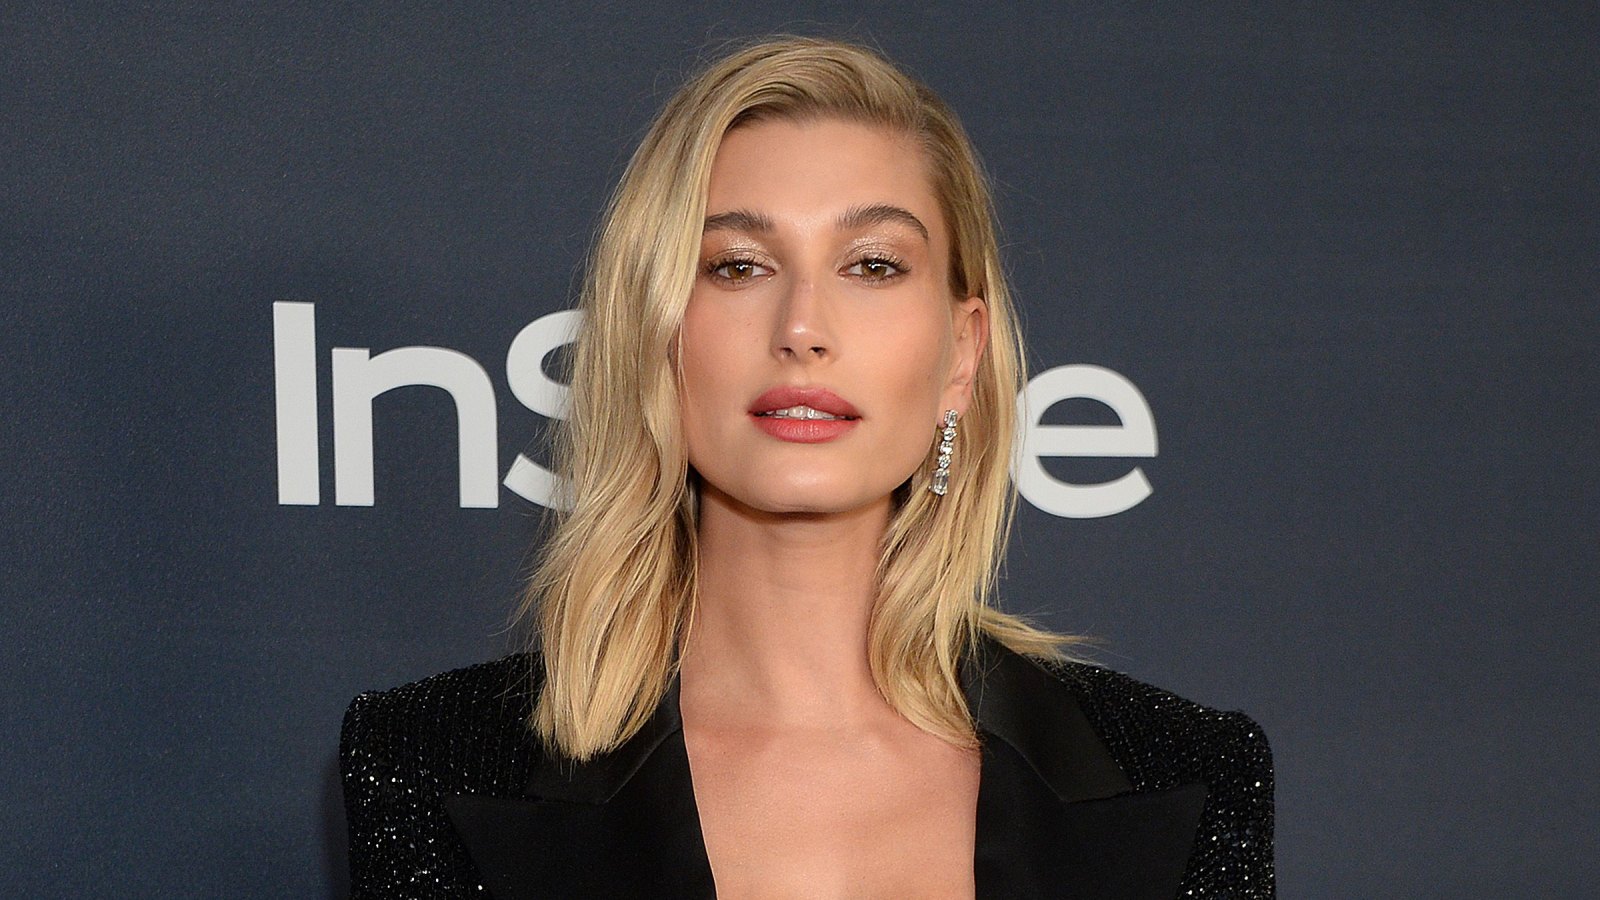 Hailey Bieber attends the InStyle and Warner Bros Golden Globes After Party on January 5, 2020 in Los Angeles.